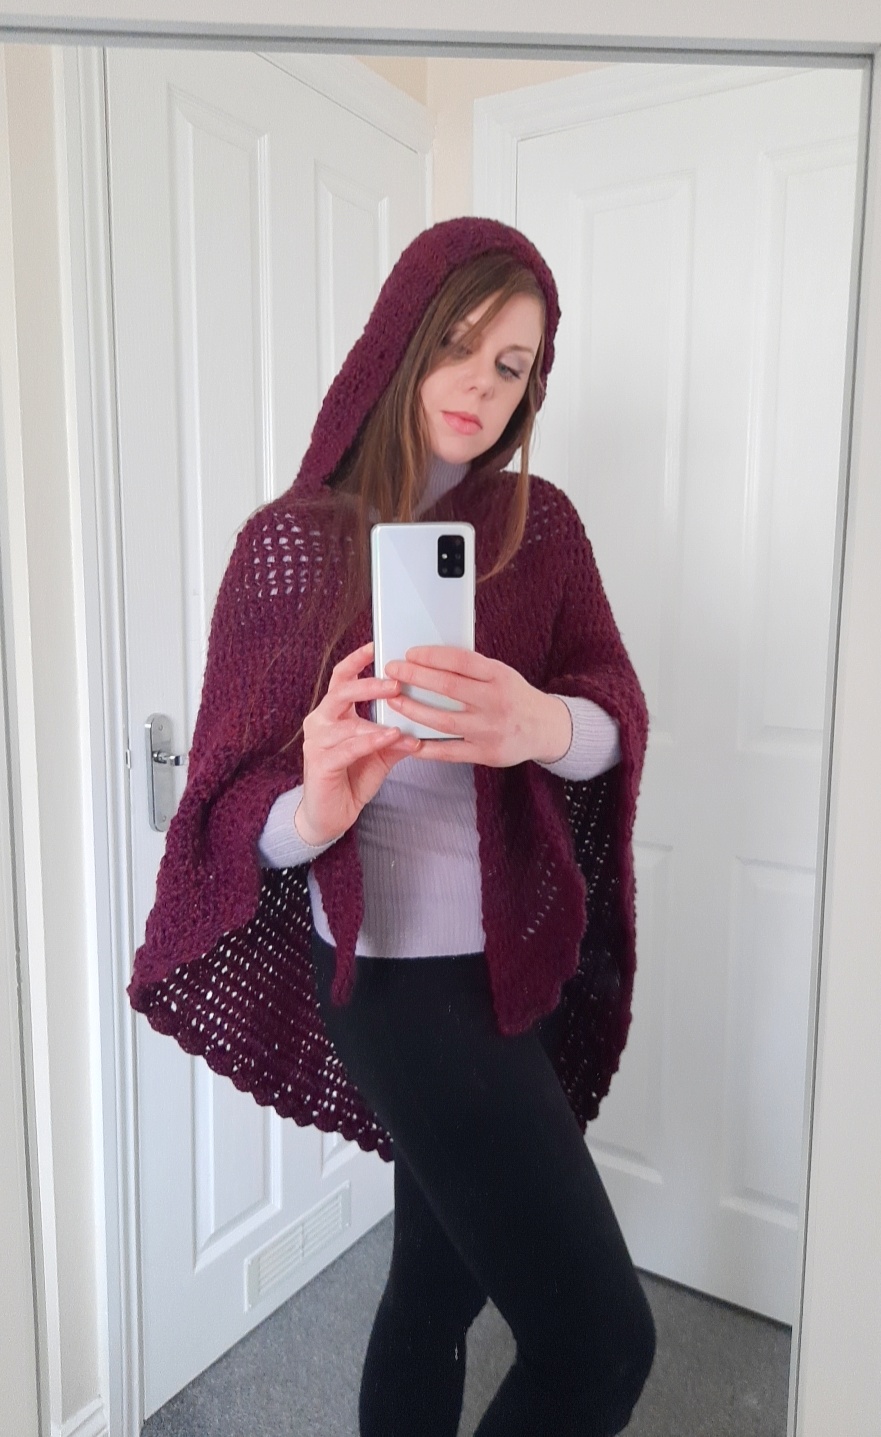 Crochet The Maiden Hooded Shawl by Selina Veronique Crochet